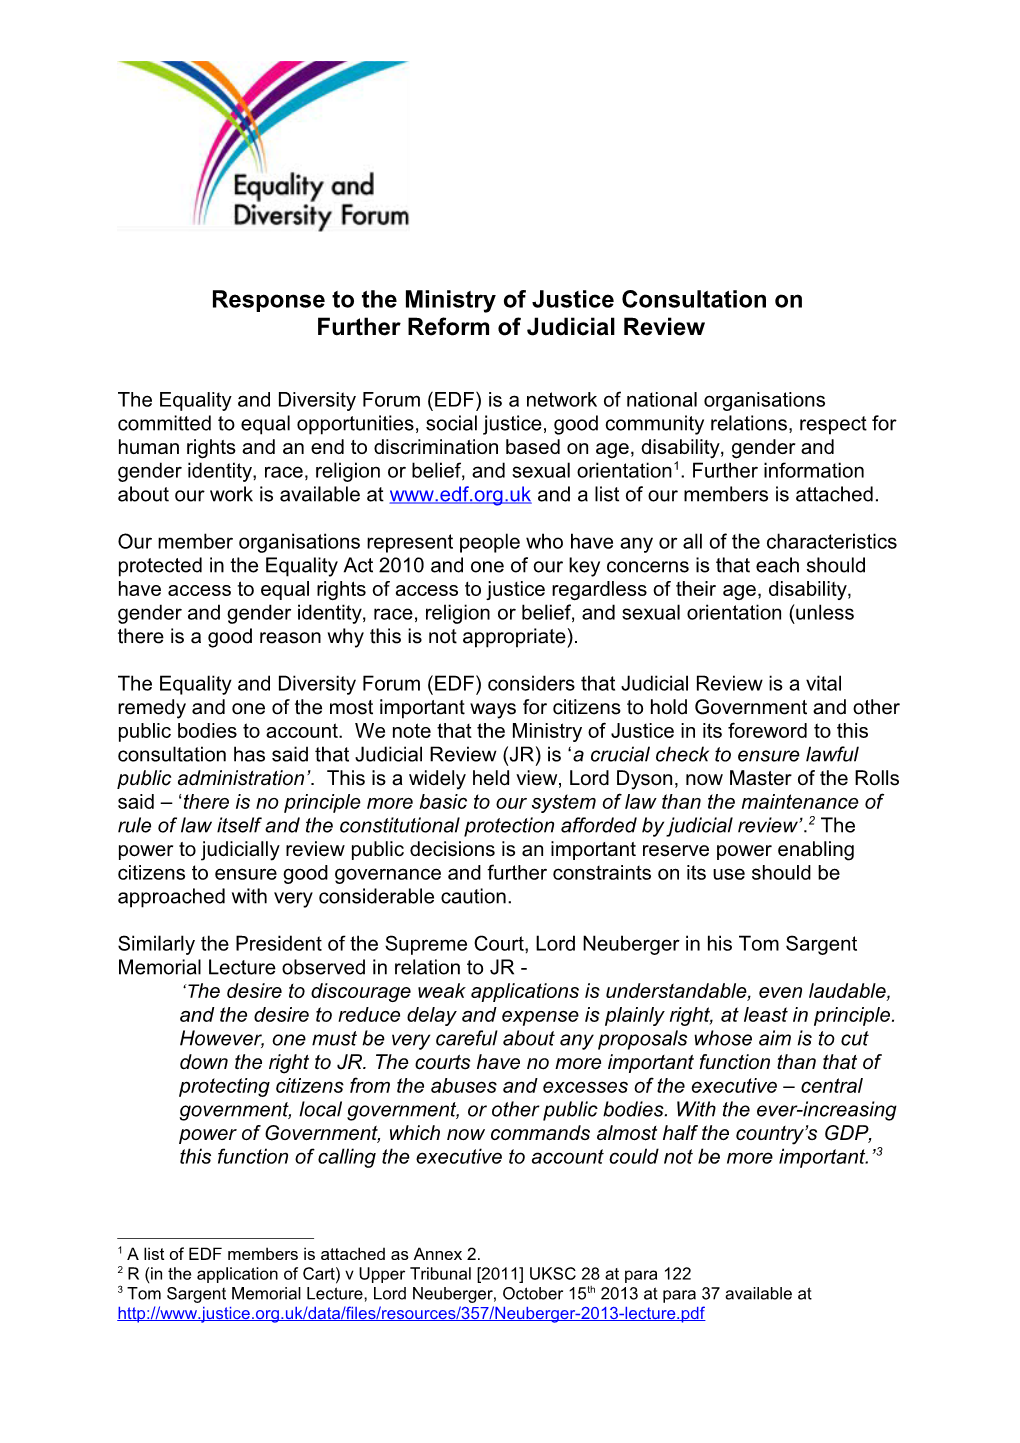 Response to the Ministry of Justice Consultation On